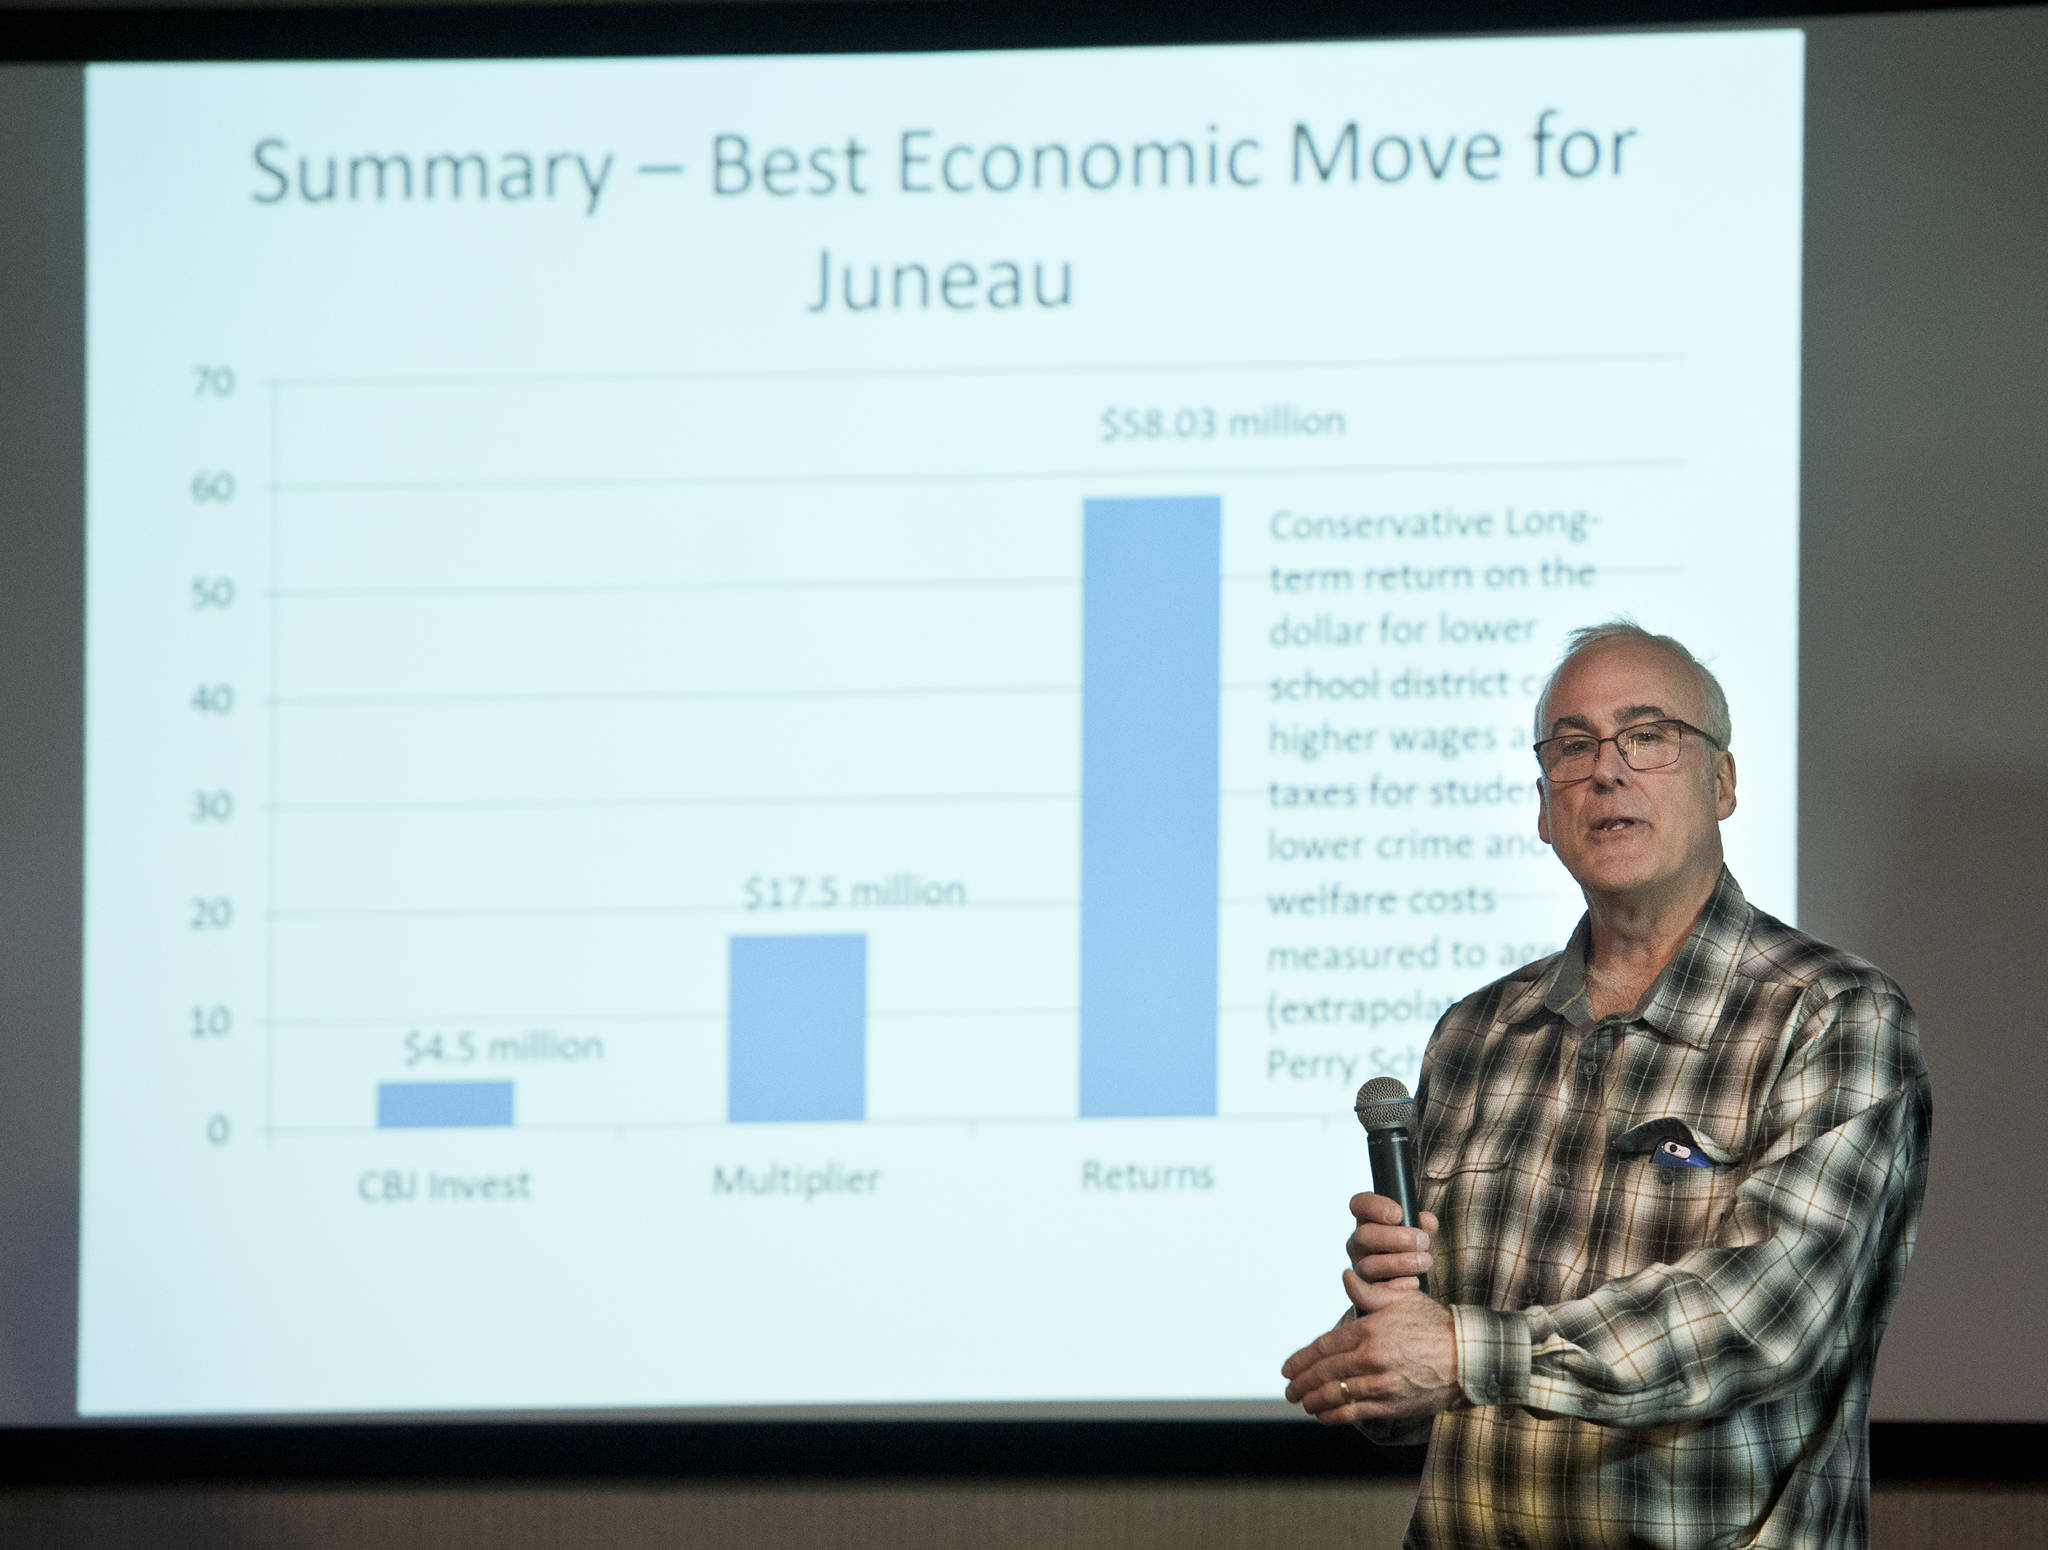 Kevin Ritchie, former Juneau city manager, speaks to the Juneau Chamber of Commerce on “Making Juneau More Family & Business Friendly with Youth Investment” at the Hangar Ballroom on Thursday. (Michael Penn | Juneau Empire)